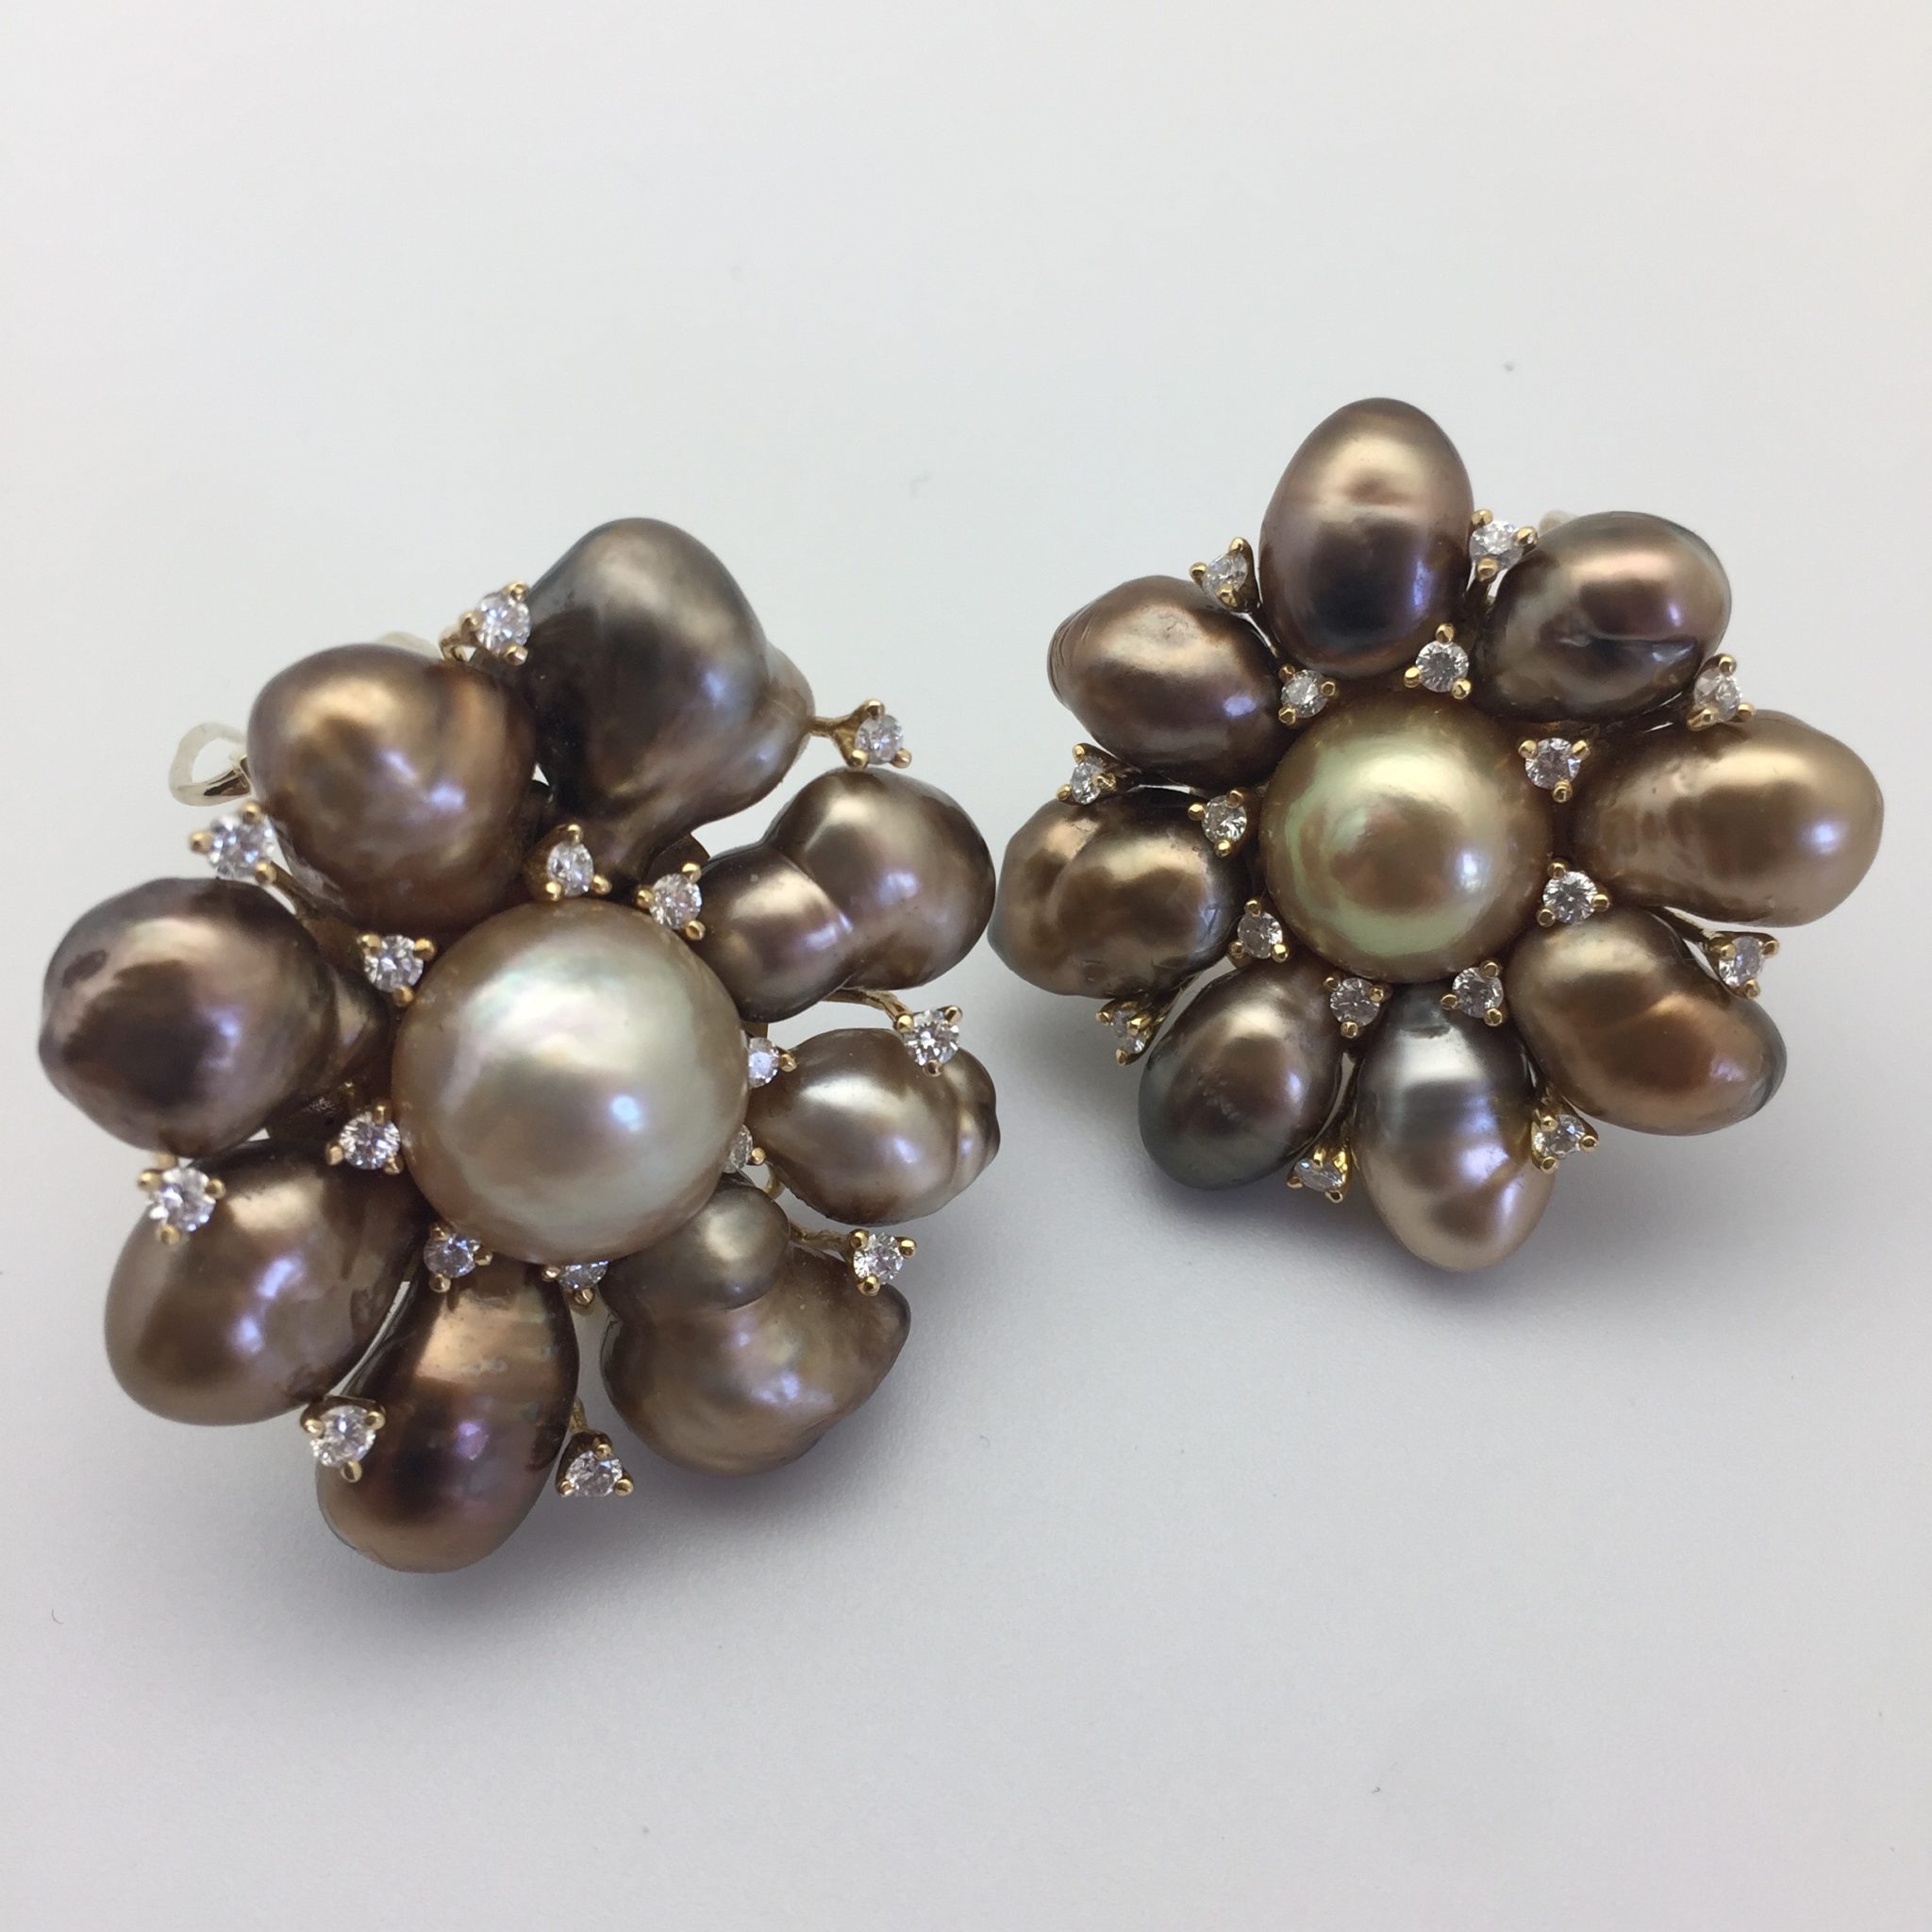 A pair of large Tahitian pearl brooches, each with 16 diamonds set in 18K gold - vintage